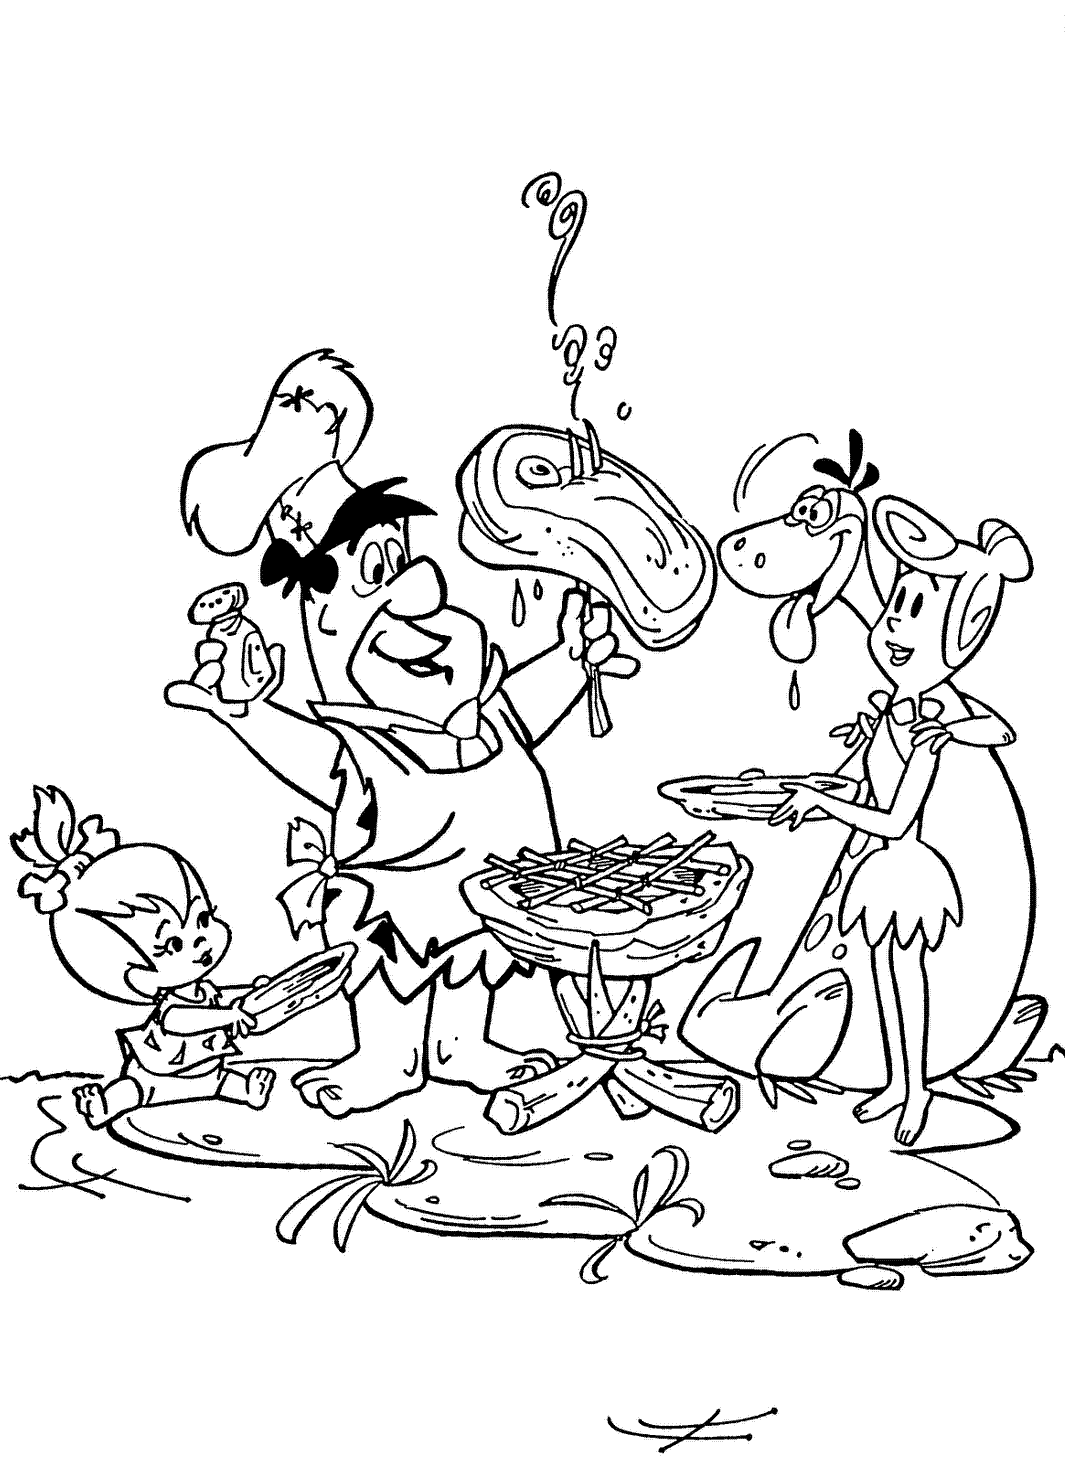 Flintstone Coloring Page - Coloring Home